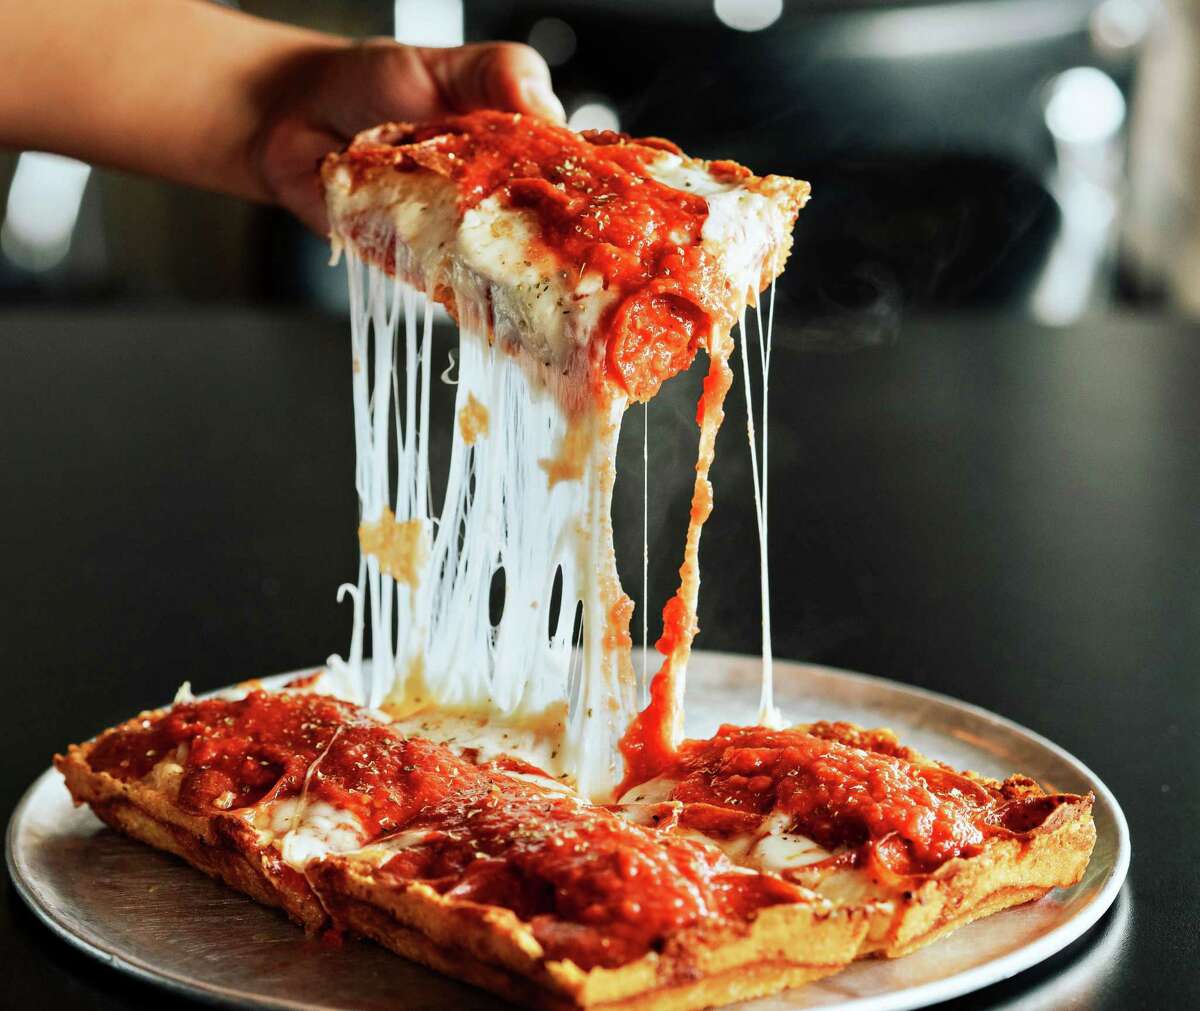 Austin-based Via 313, specializing in Detroit-style pizza, will open at 10201 Kay Fwy. in Memorial City in spring 2023.